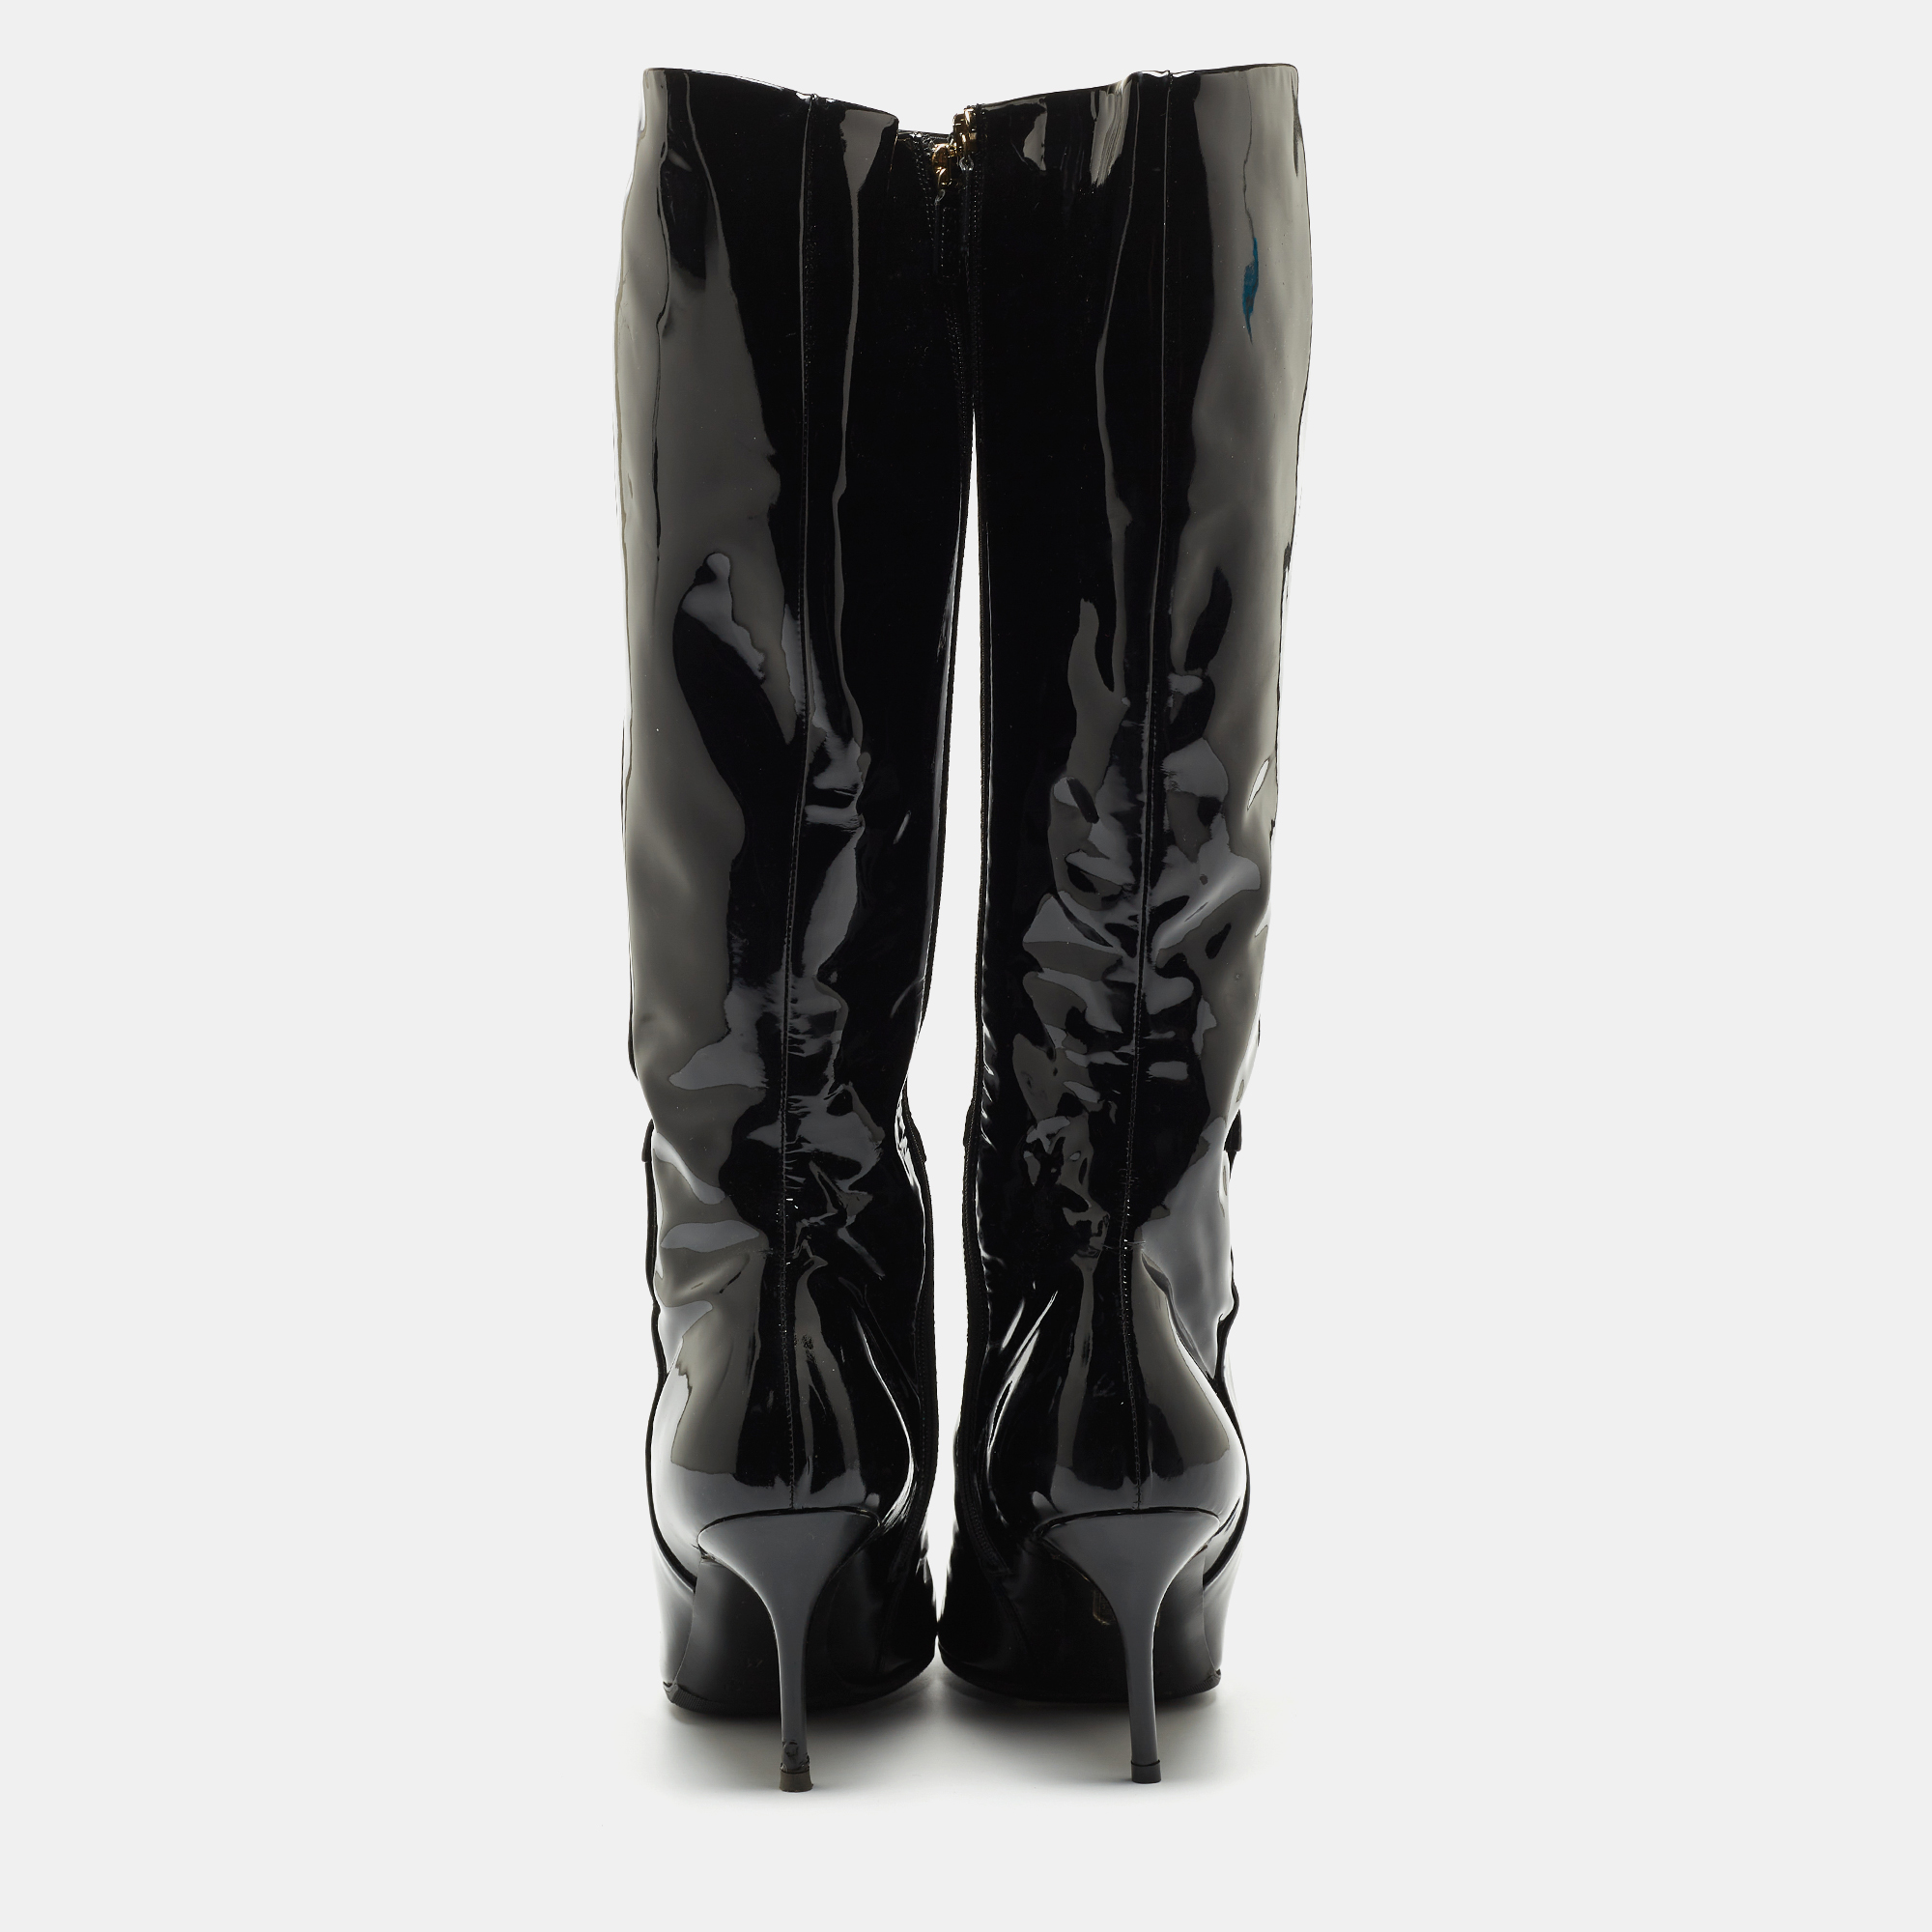 Gucci Black Patent Knee Length Boots Size 41